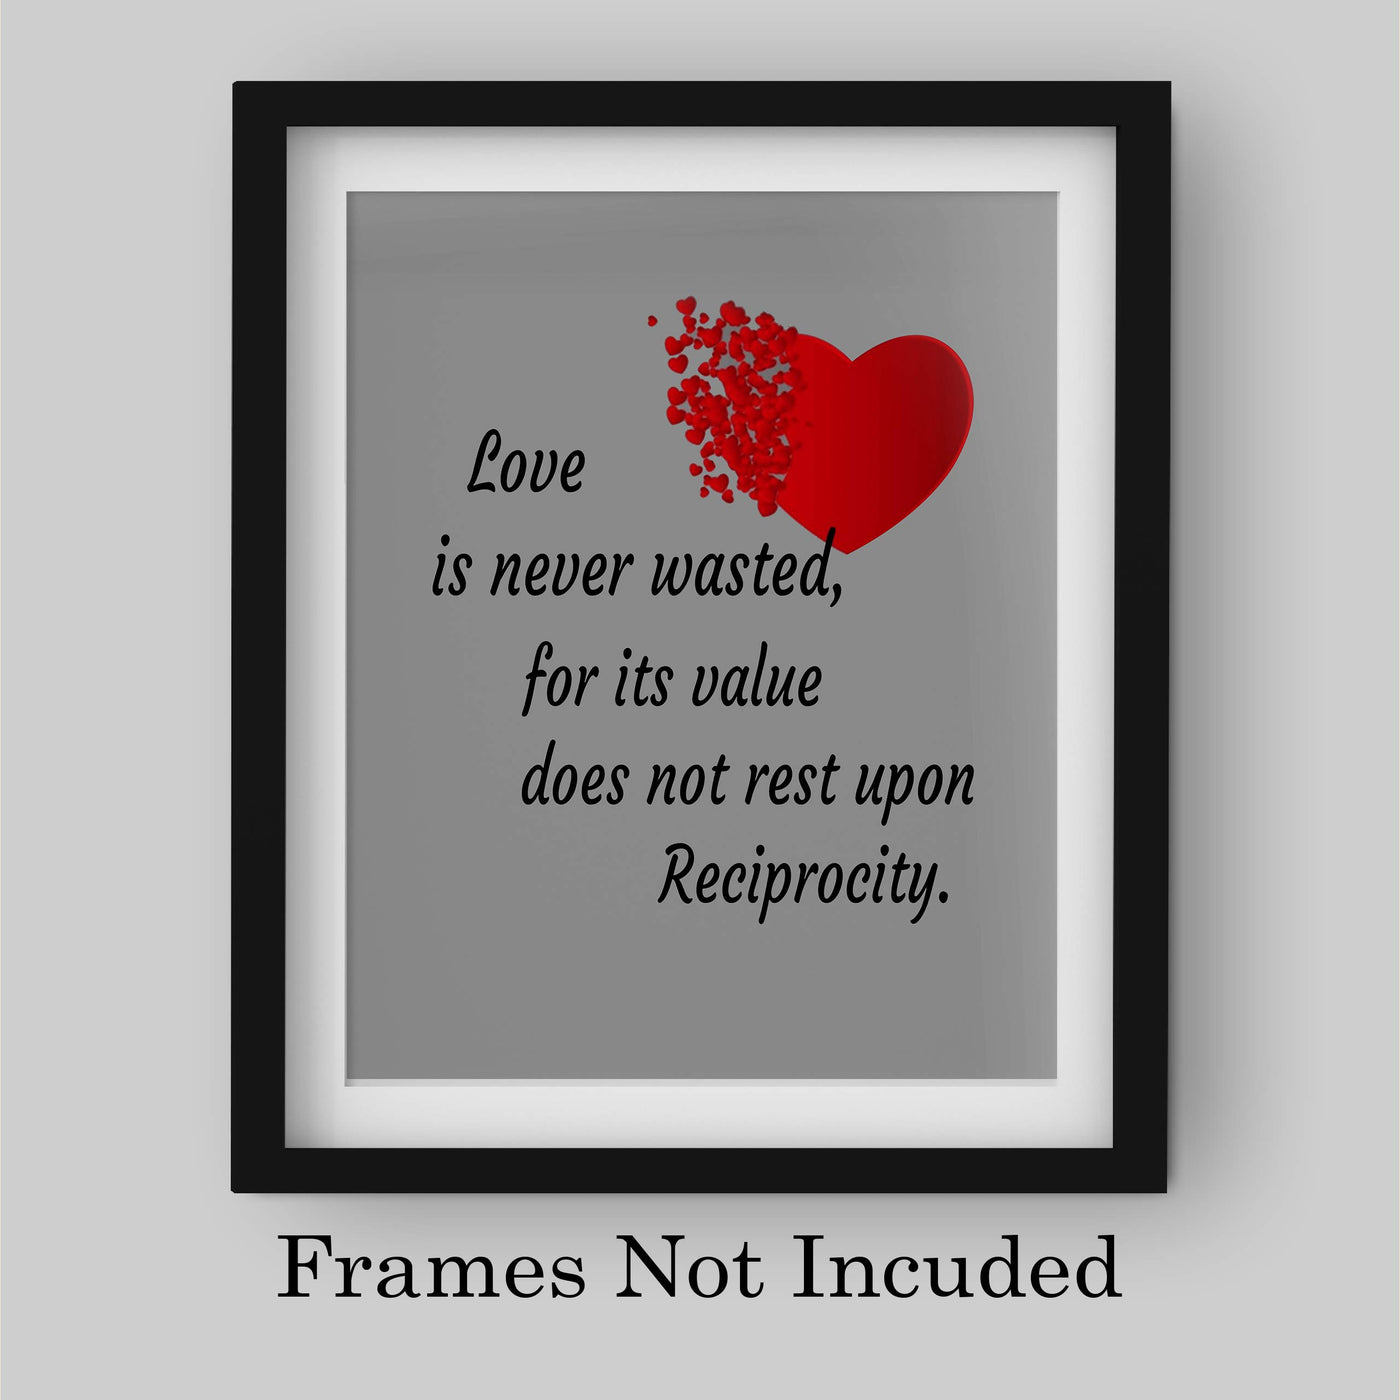 Love Is Never Wasted Love Quotes Wall Art -8 x 10" Poetic Typographic Art Print-Ready to Frame. Home-Bedroom-Office-Studio Decor. Loving Message for Spouses-Newlyweds-Partners. Great Romantic Gift!